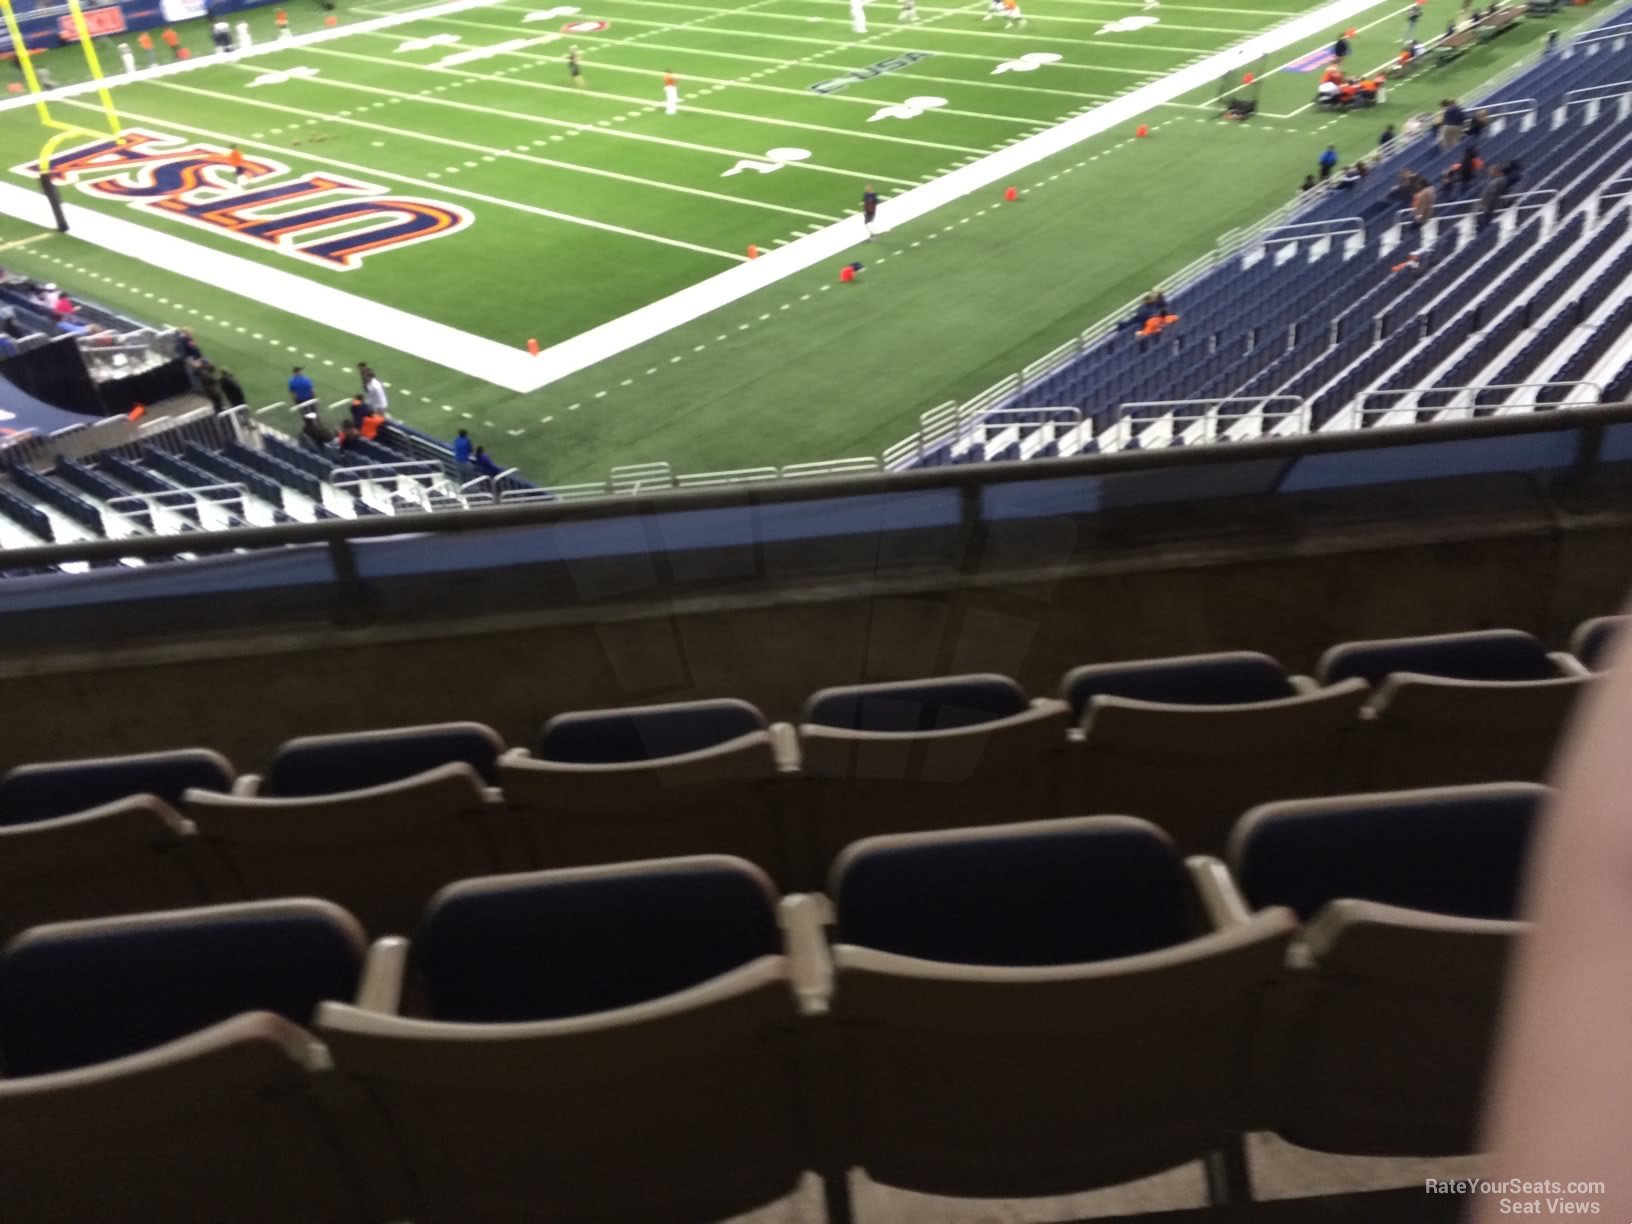 section 218b, row 5 seat view  for football - alamodome